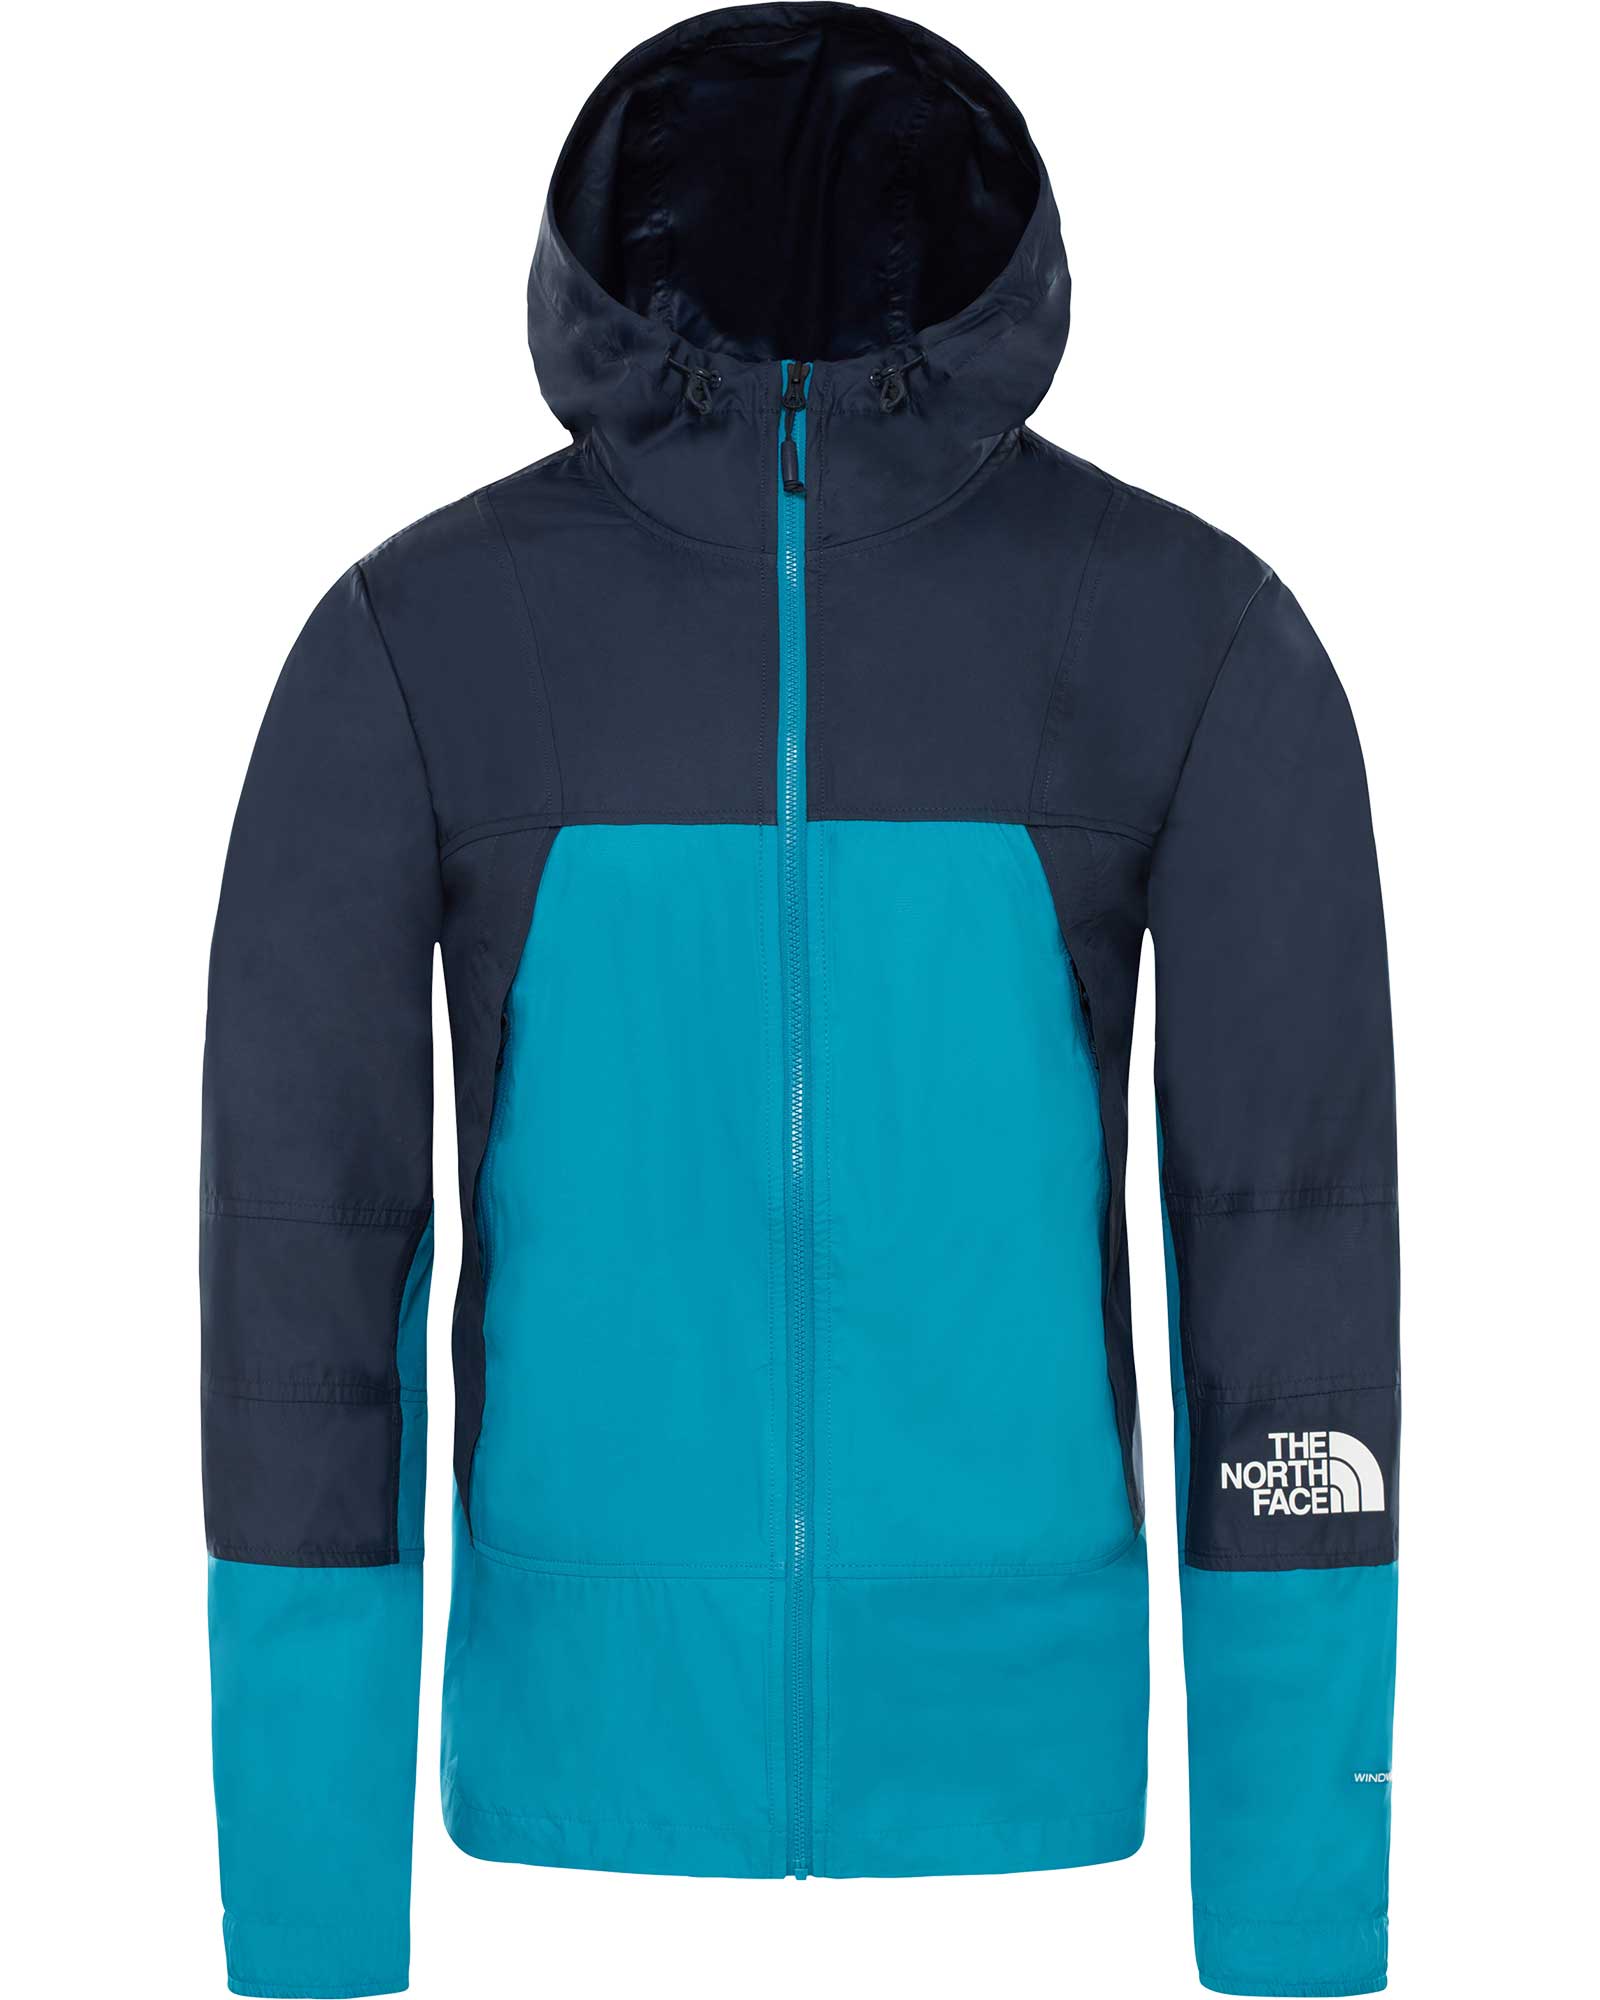 The North Face Men’s Mountain Light Windshell Jacket - Crystal Teal M